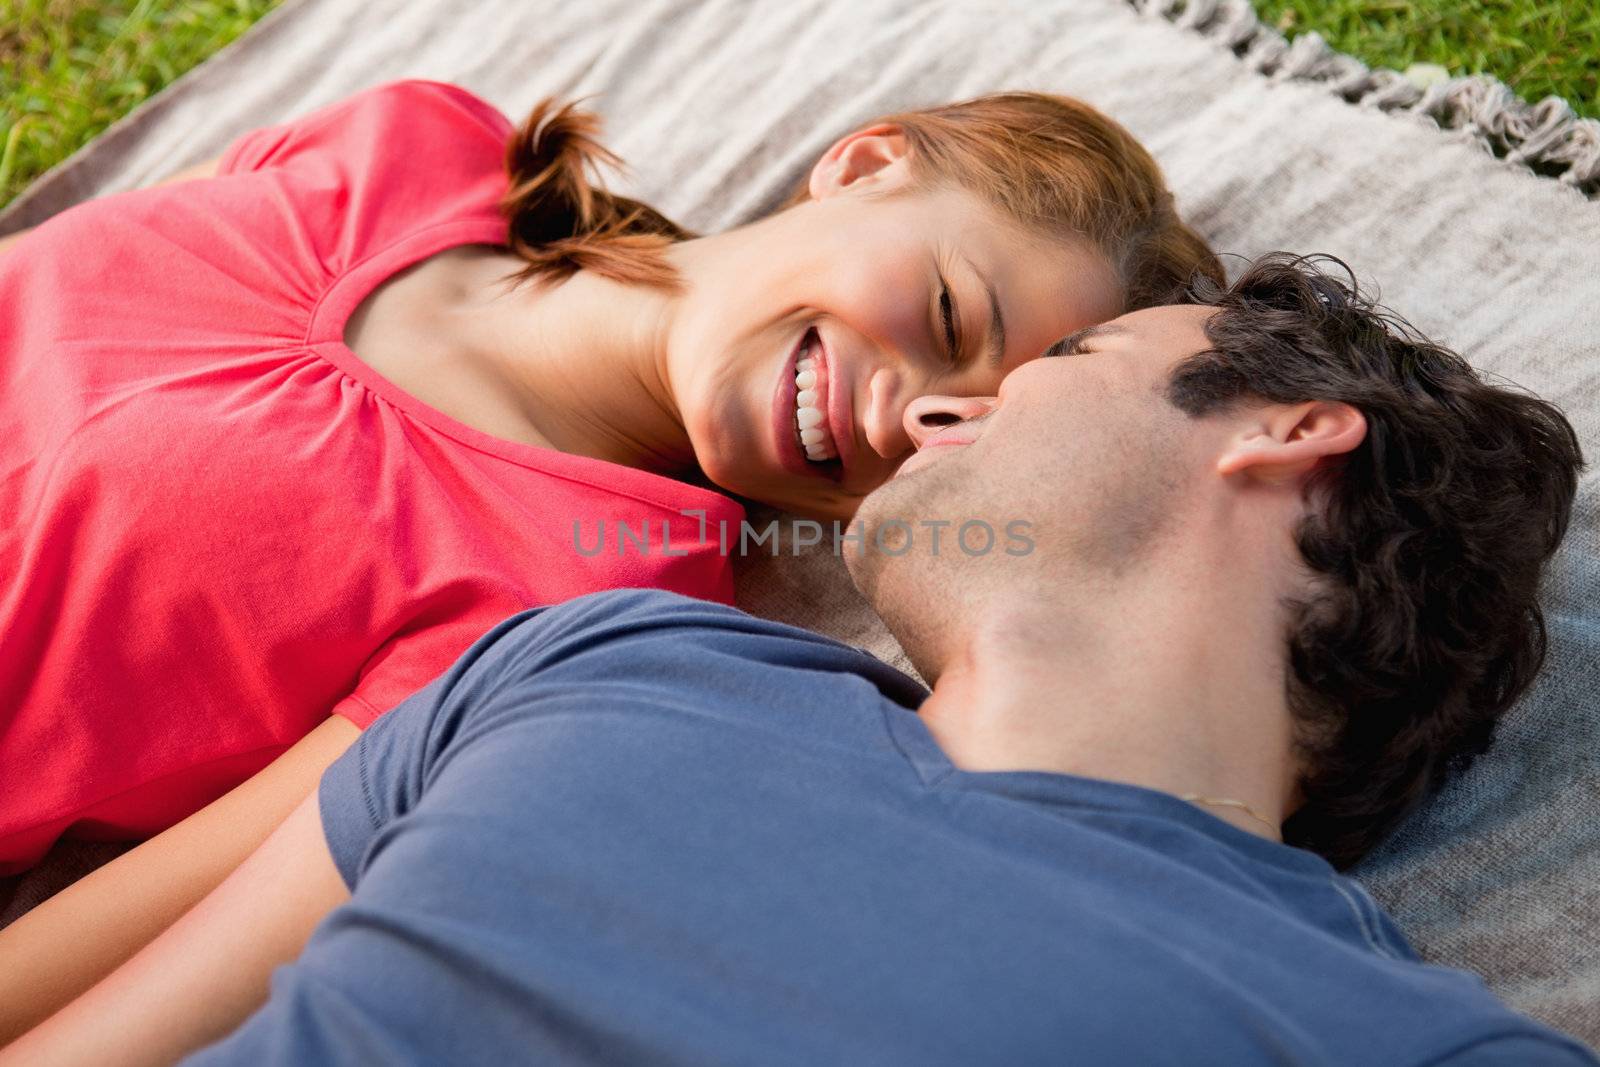 Woman smiling with her eyes closed while lying with her friend on a grey quilt